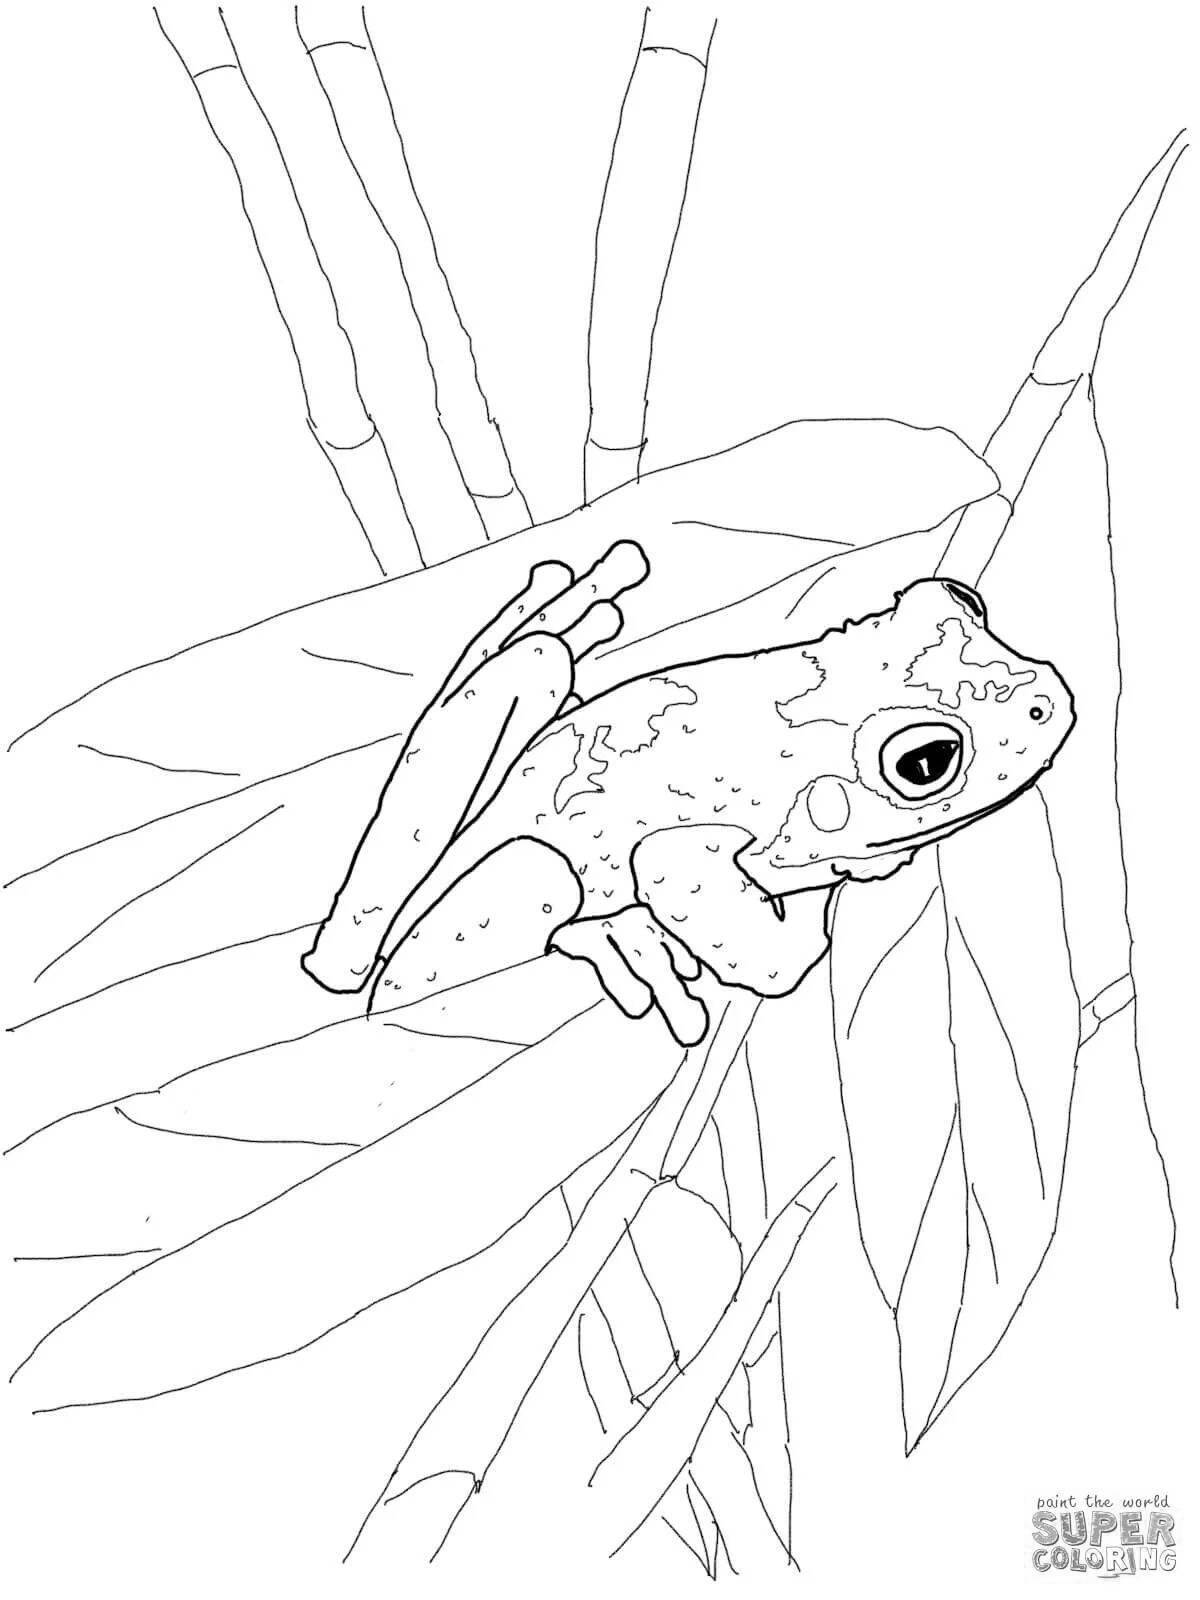 Colorful tree frog coloring page